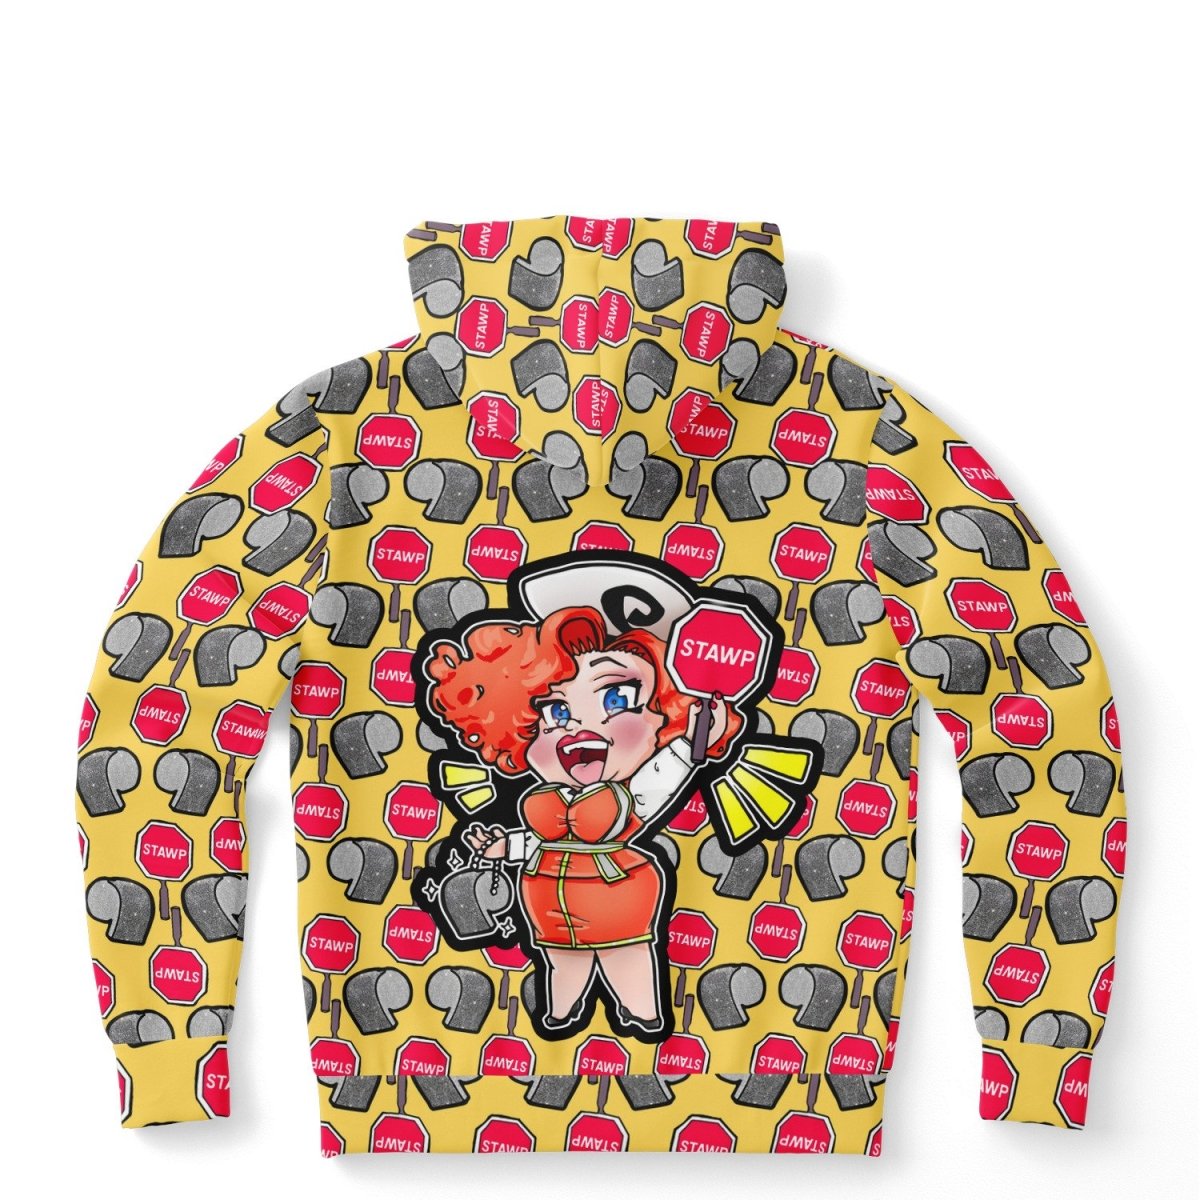 Eureka O'Hara "Stawp Pattern" All Over Print Hoodie - dragqueenmerch